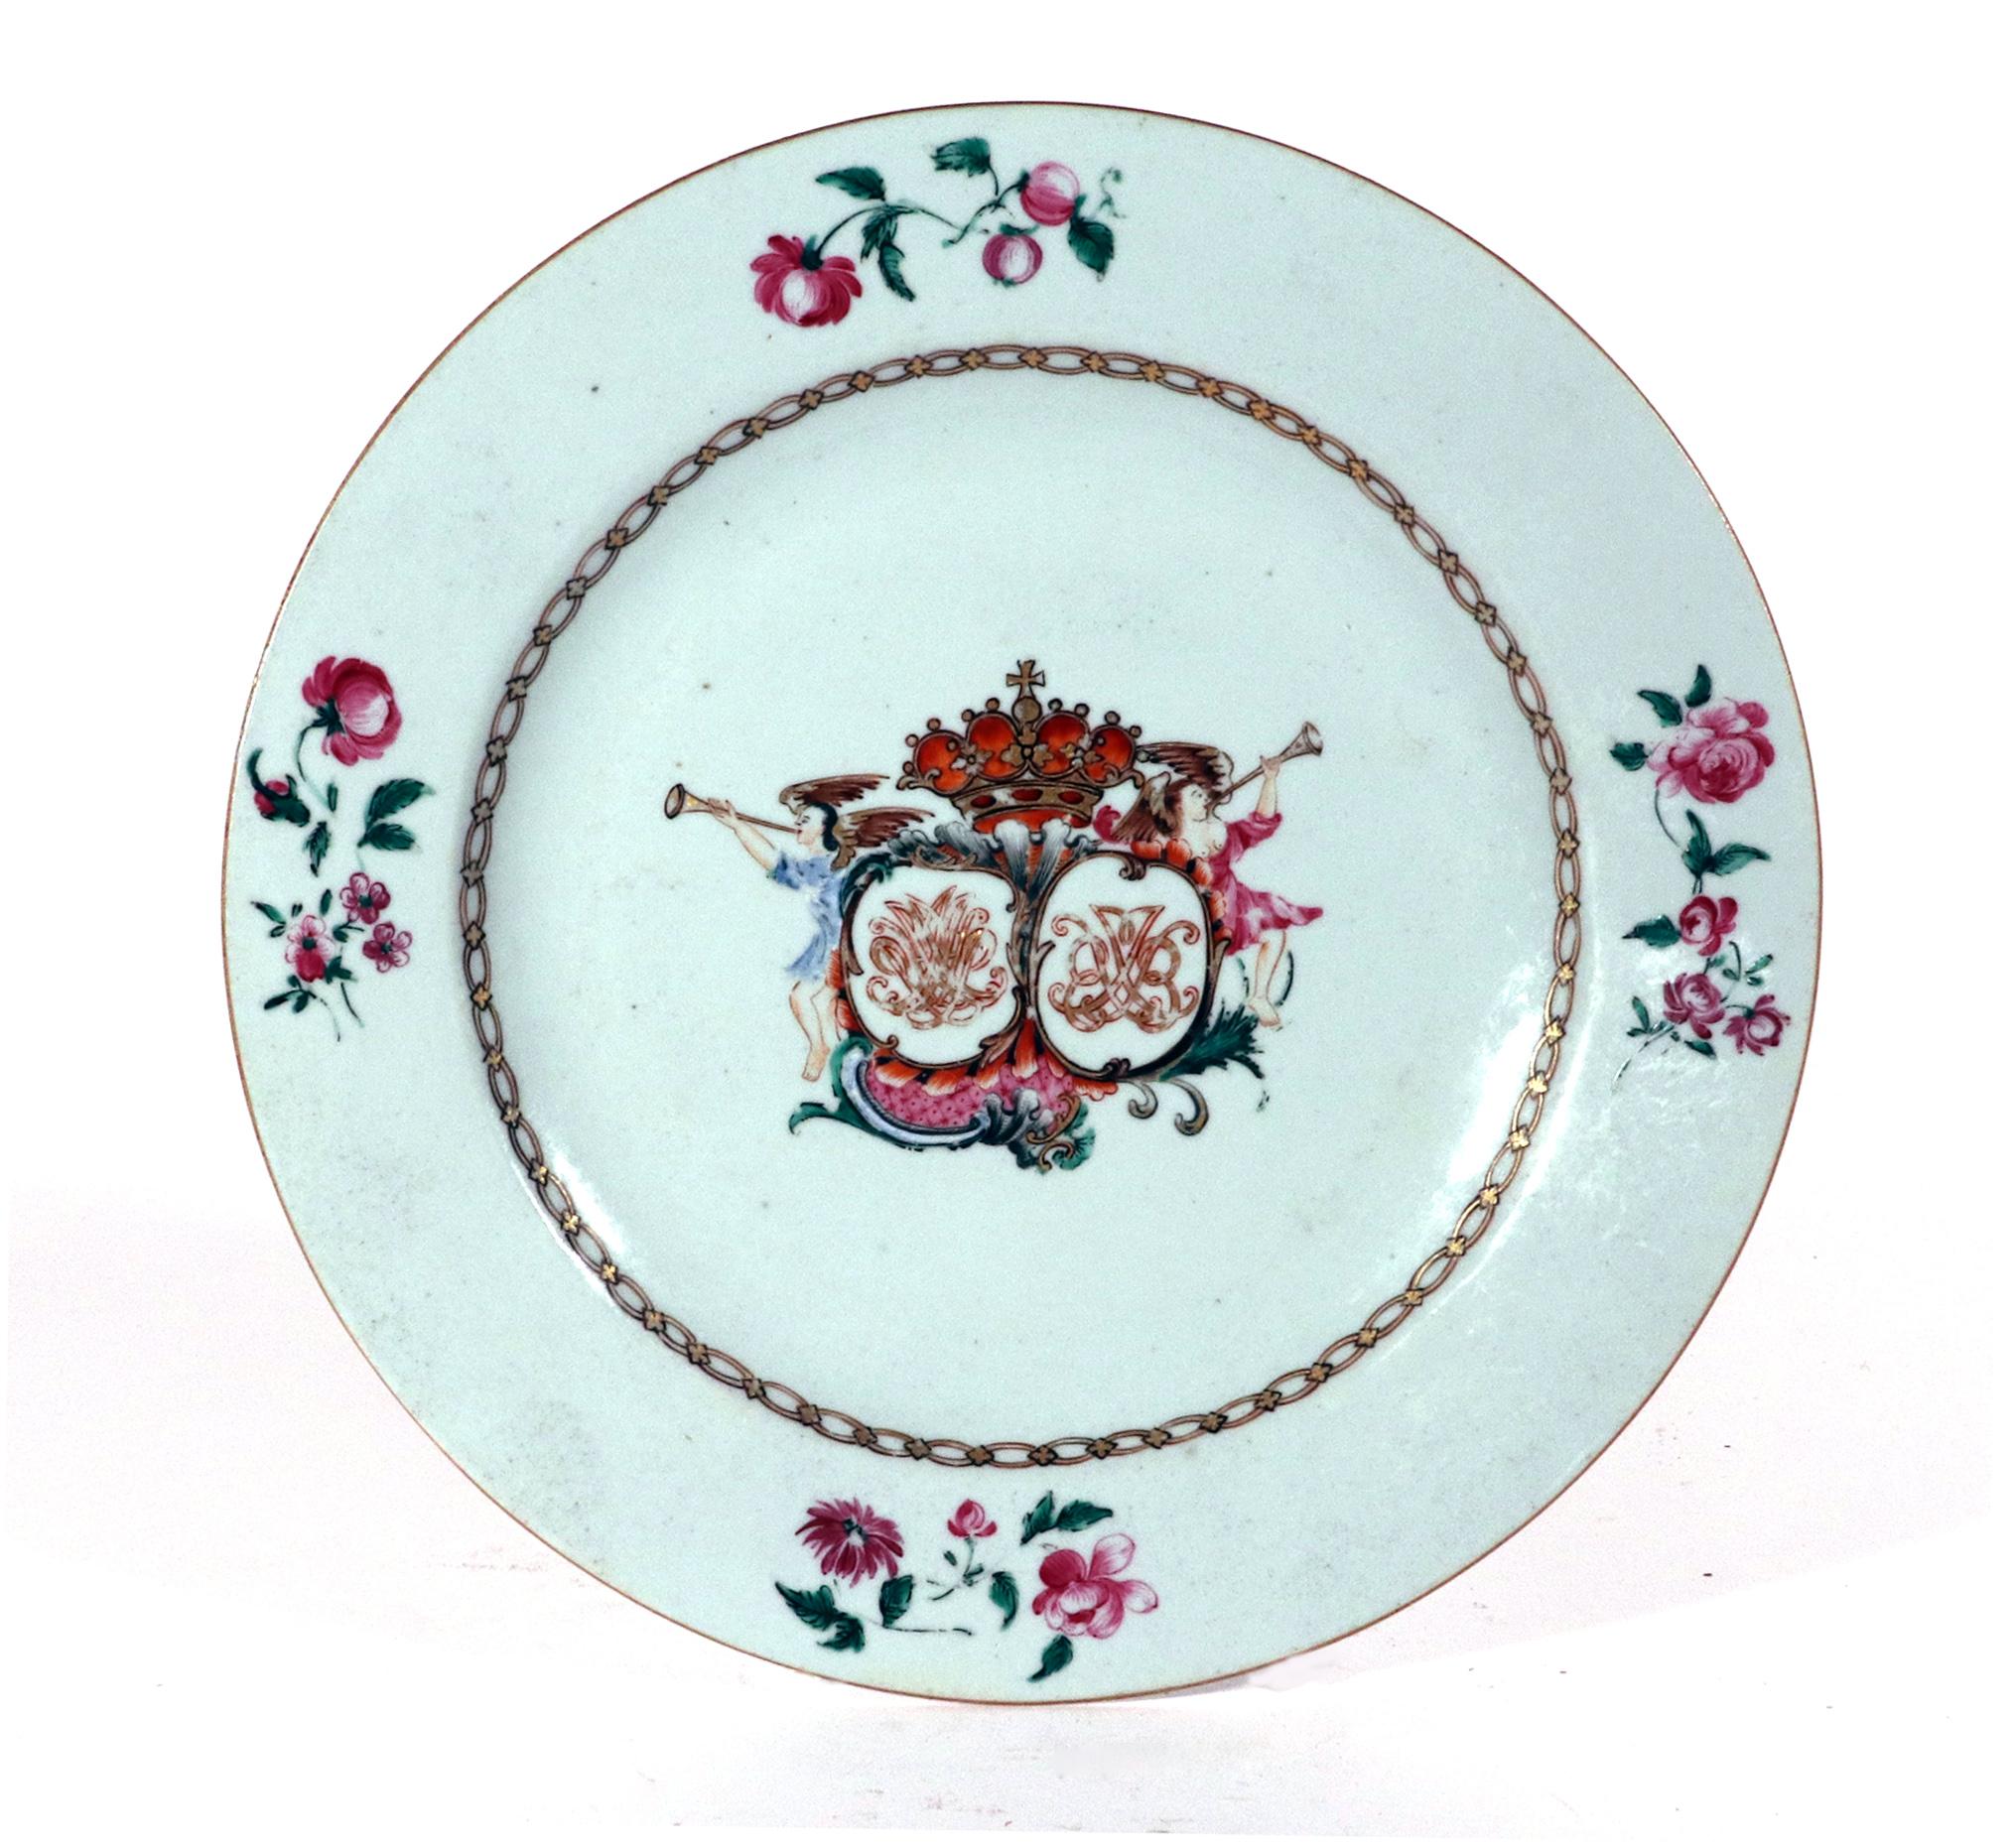 Chinese Export Porcelain Armorial Double Crest Marriage Dinner Plate,
Probably the Dutch Market,
Circa 1755-60

The attractive Chinese Export crested armorial marriage plate has a central design with shields, each with a different gilt cyphers,